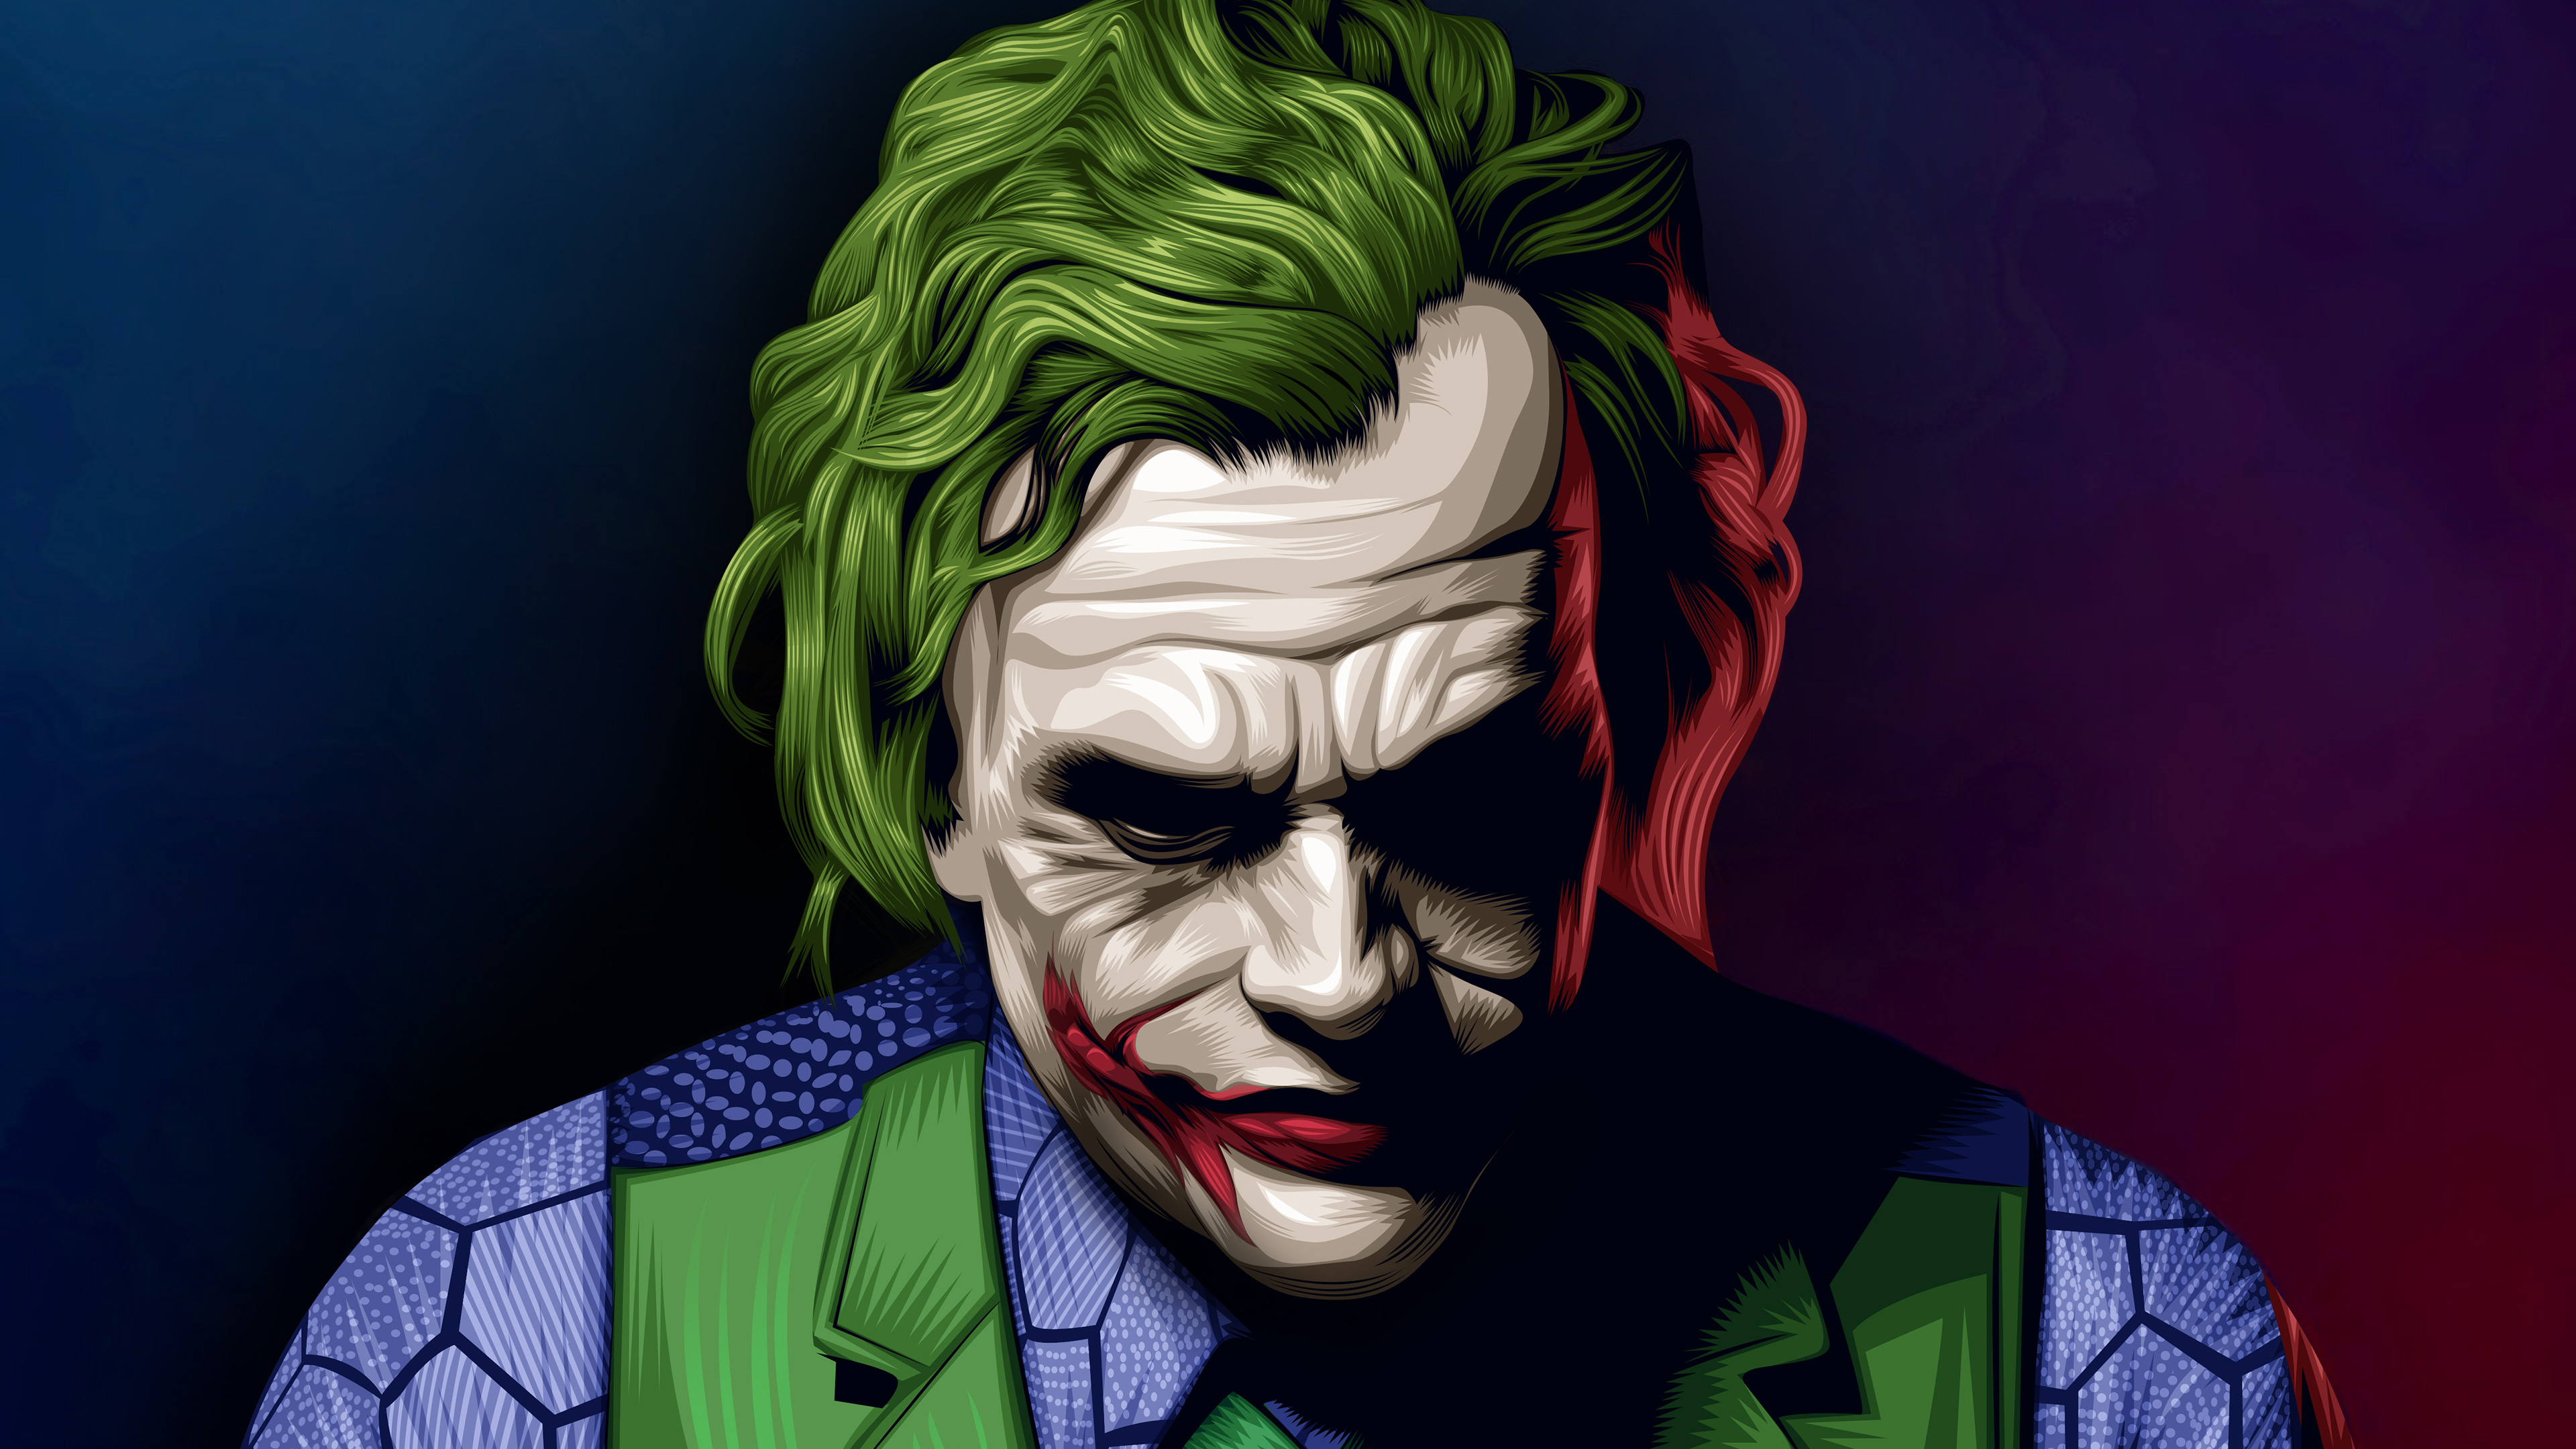 Joker Heath Ledger Illustration, HD Superheroes, 4k Wallpapers, Images,  Backgrounds, Photos and Pictures